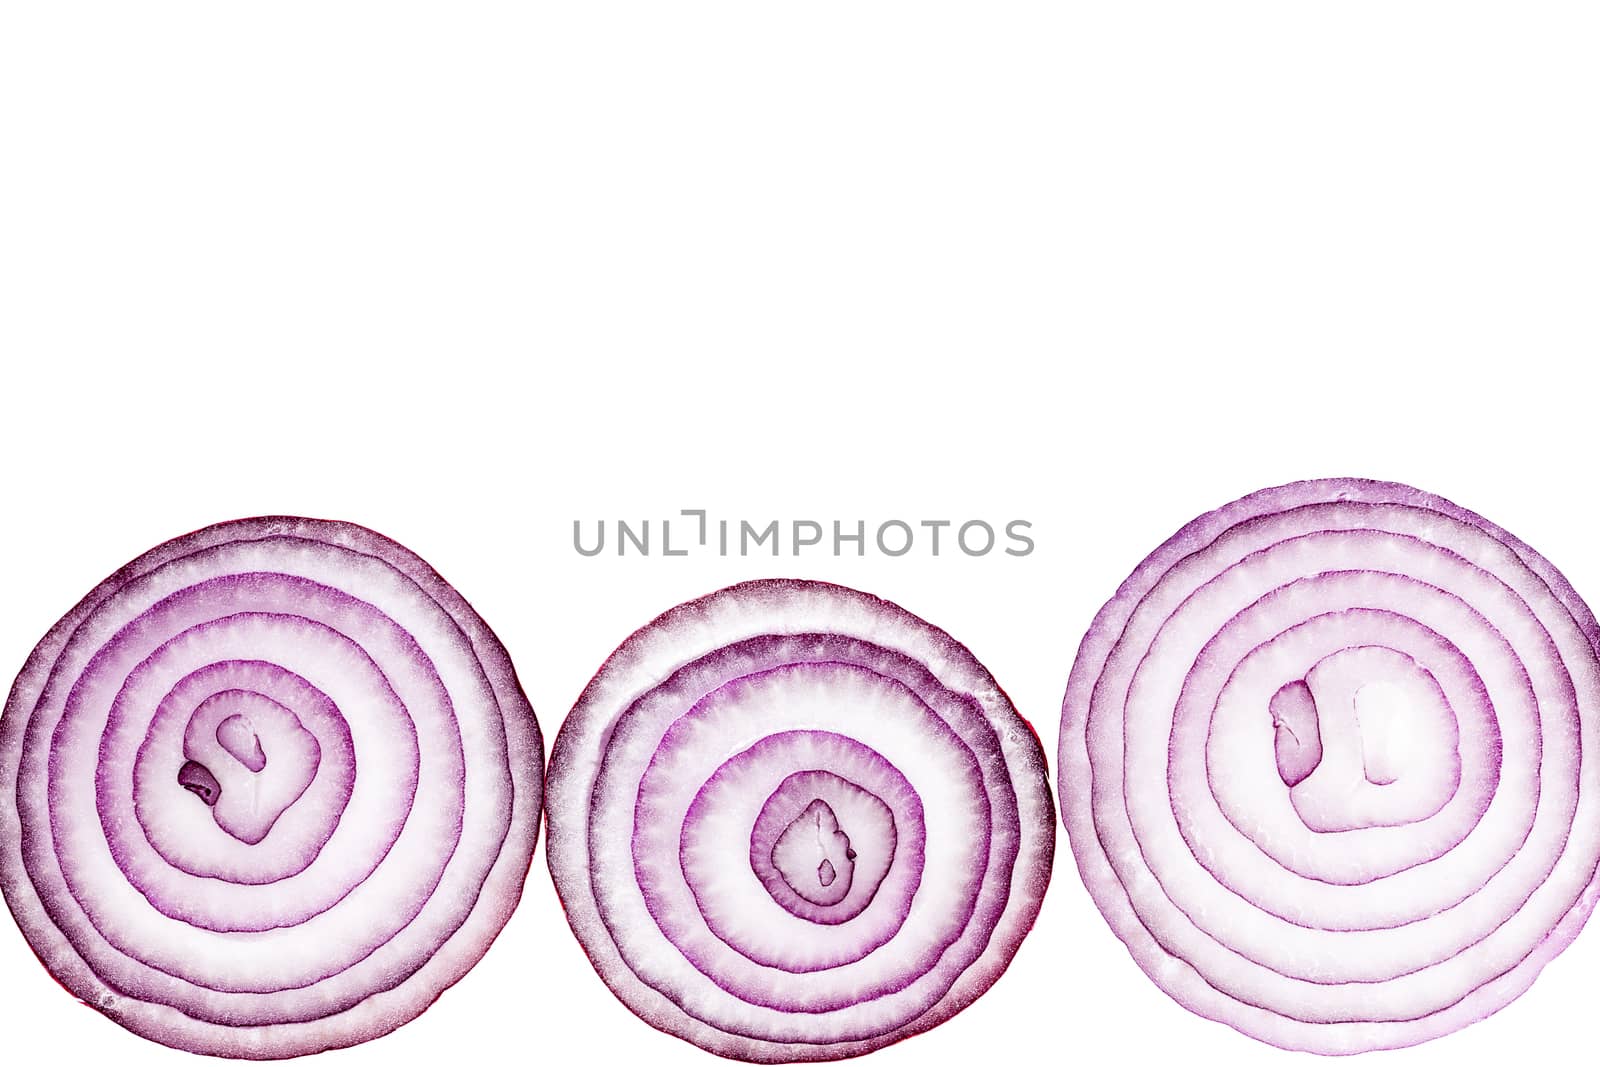 
Composition of the cut red onion, place for text.